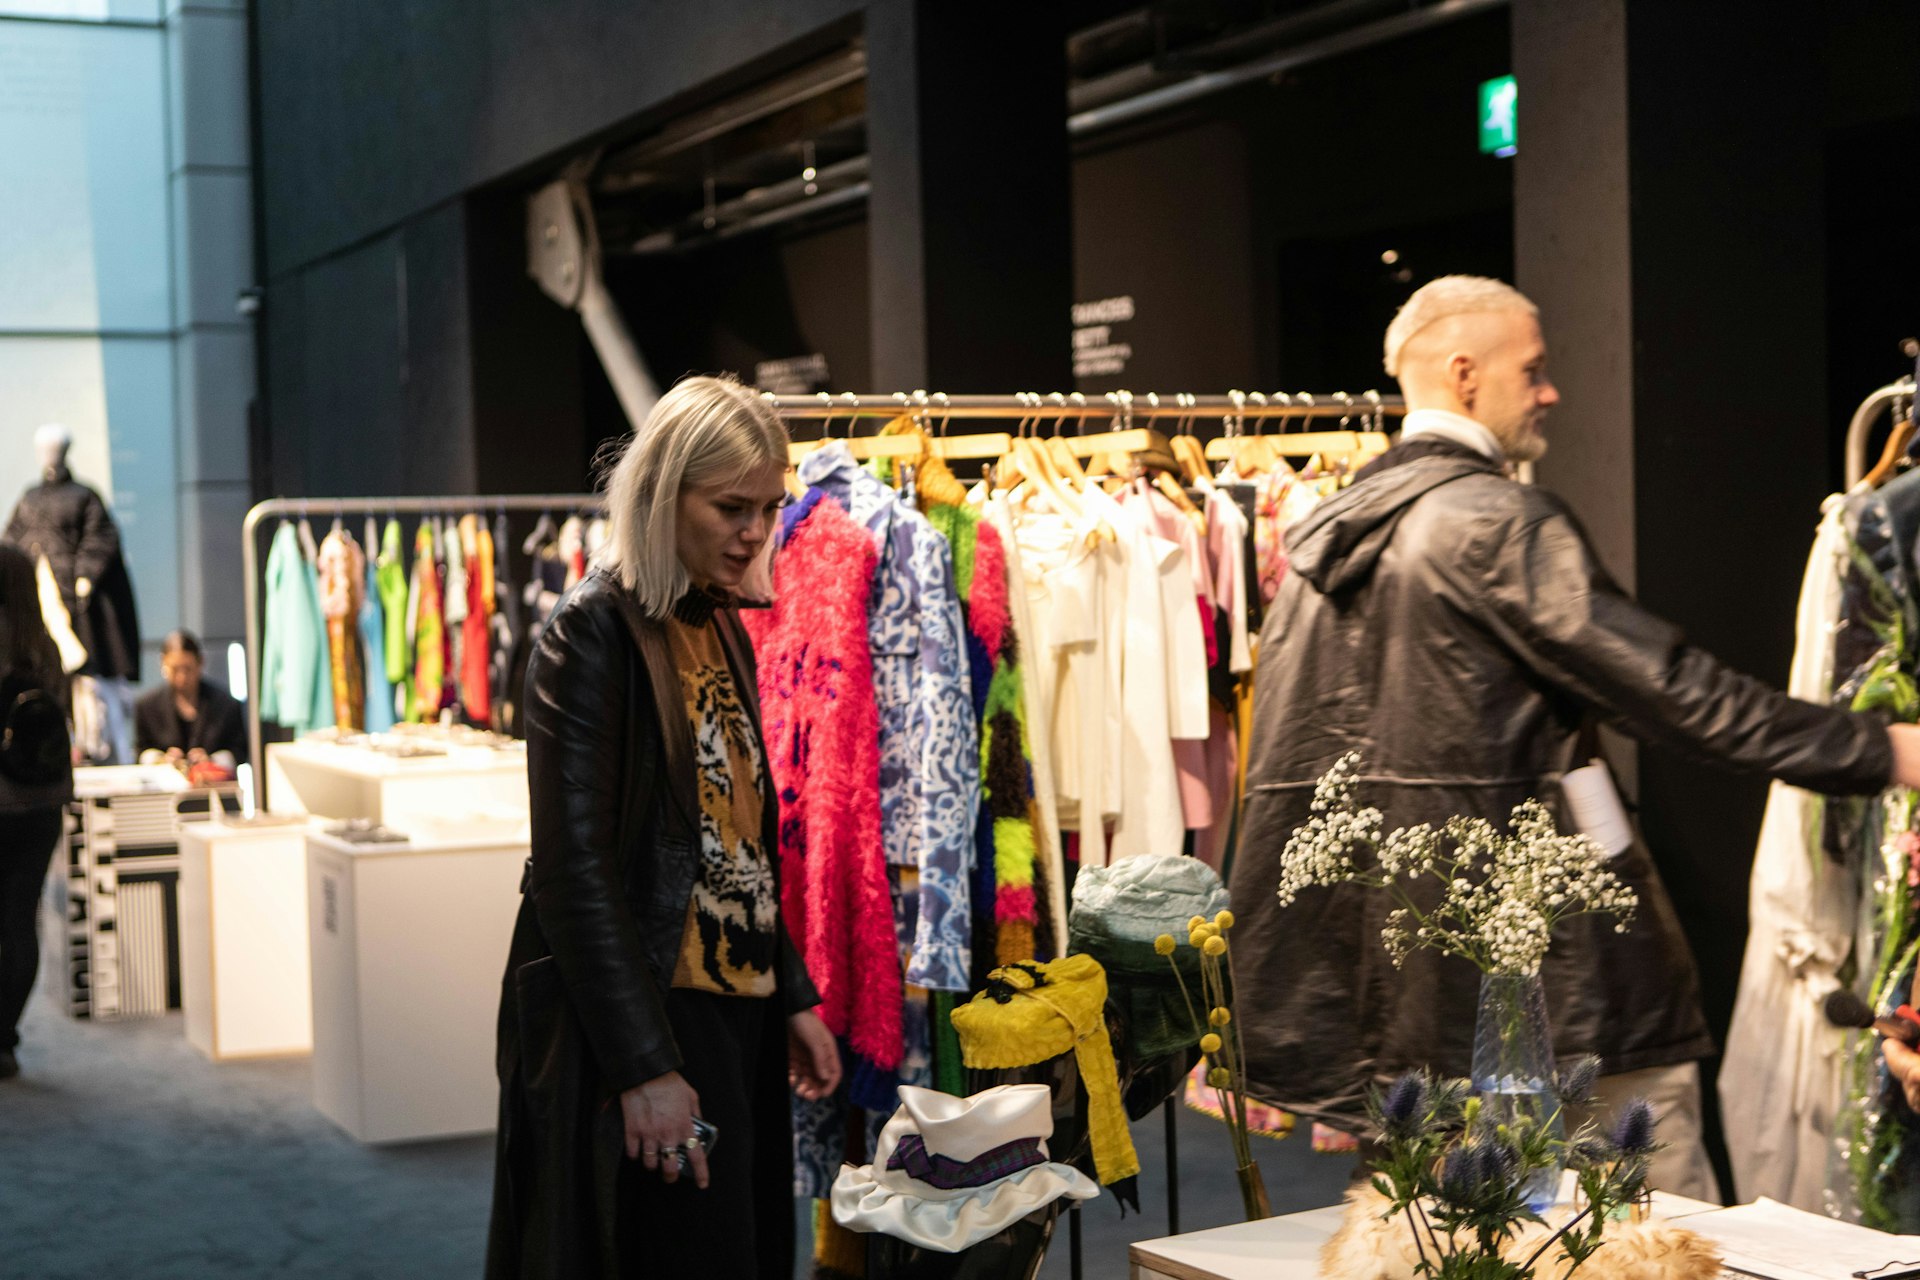 A woman browses through a rail of clothes at a fashion event